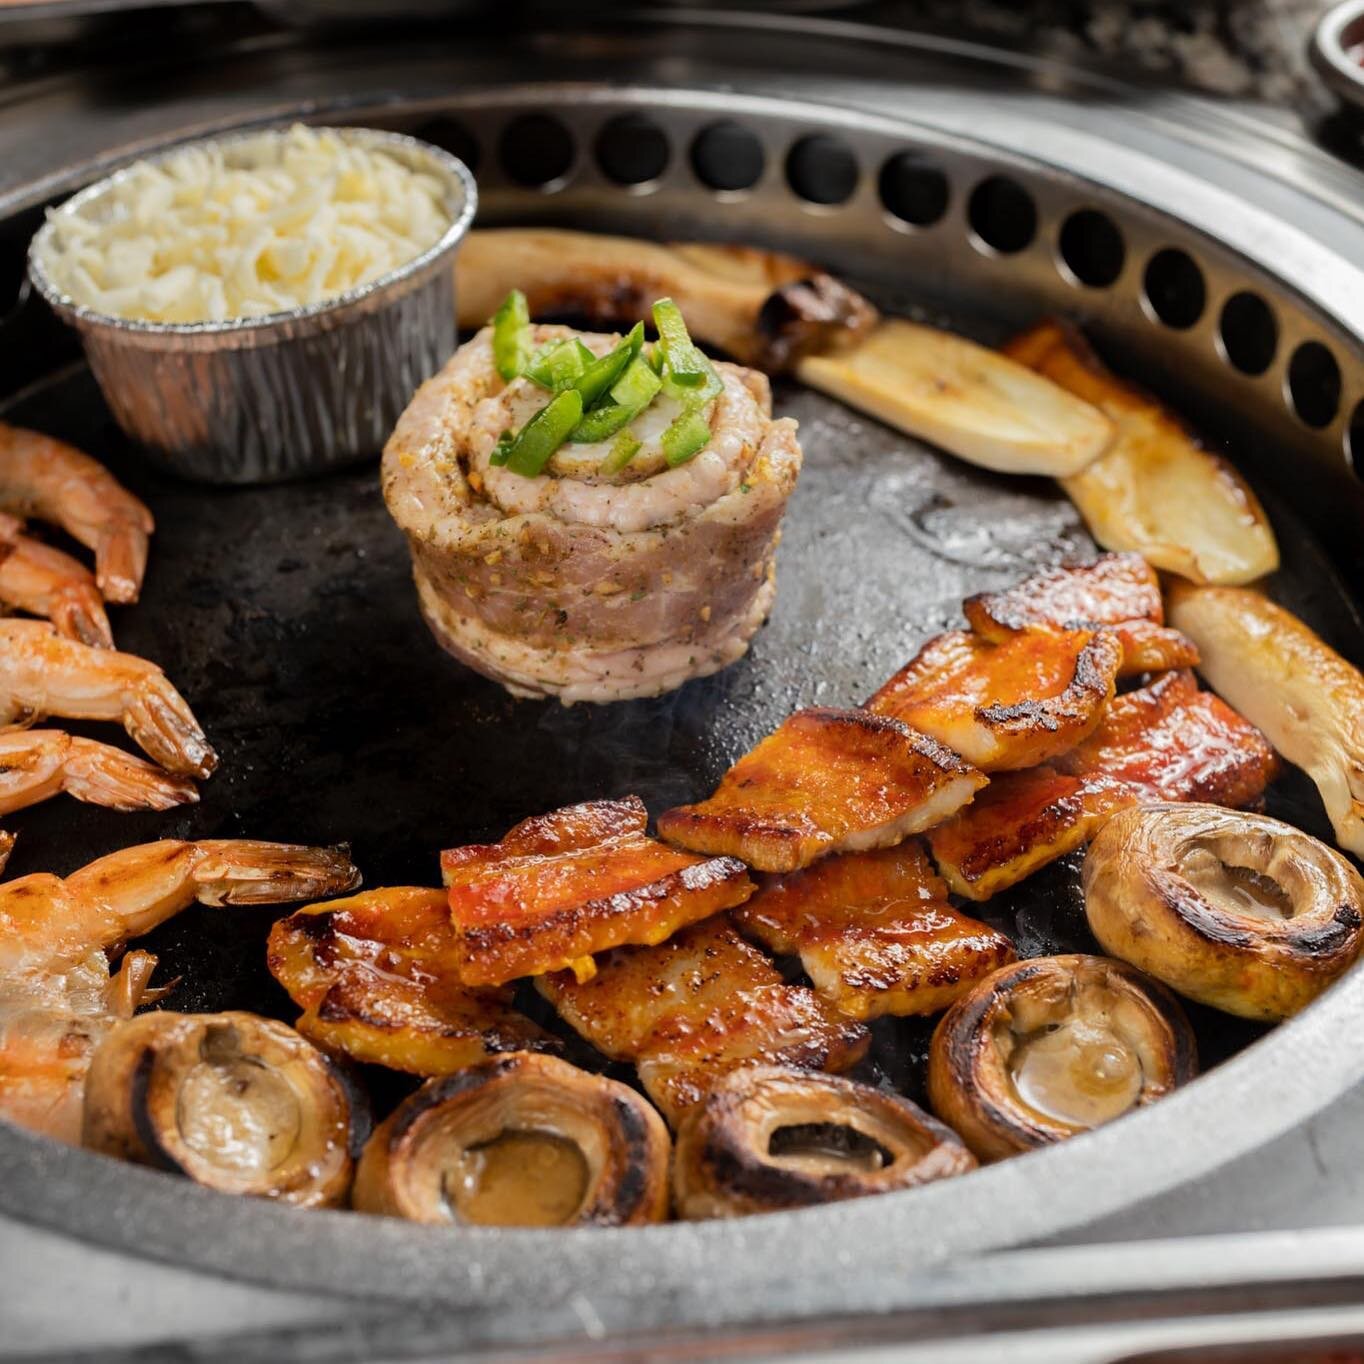 You say: Lunch? / We say: Let&rsquo;s Meat in South End for ALL YOU CAN EAT KOREAN BBQ! 

No reservations needed. See you soon. 😎 
.
#koreanbbq #allyoucaneat #letsmeat #letsmeatkbbq #charlottenc #southendclt #clt #cltnc #clteats #cltfoodie